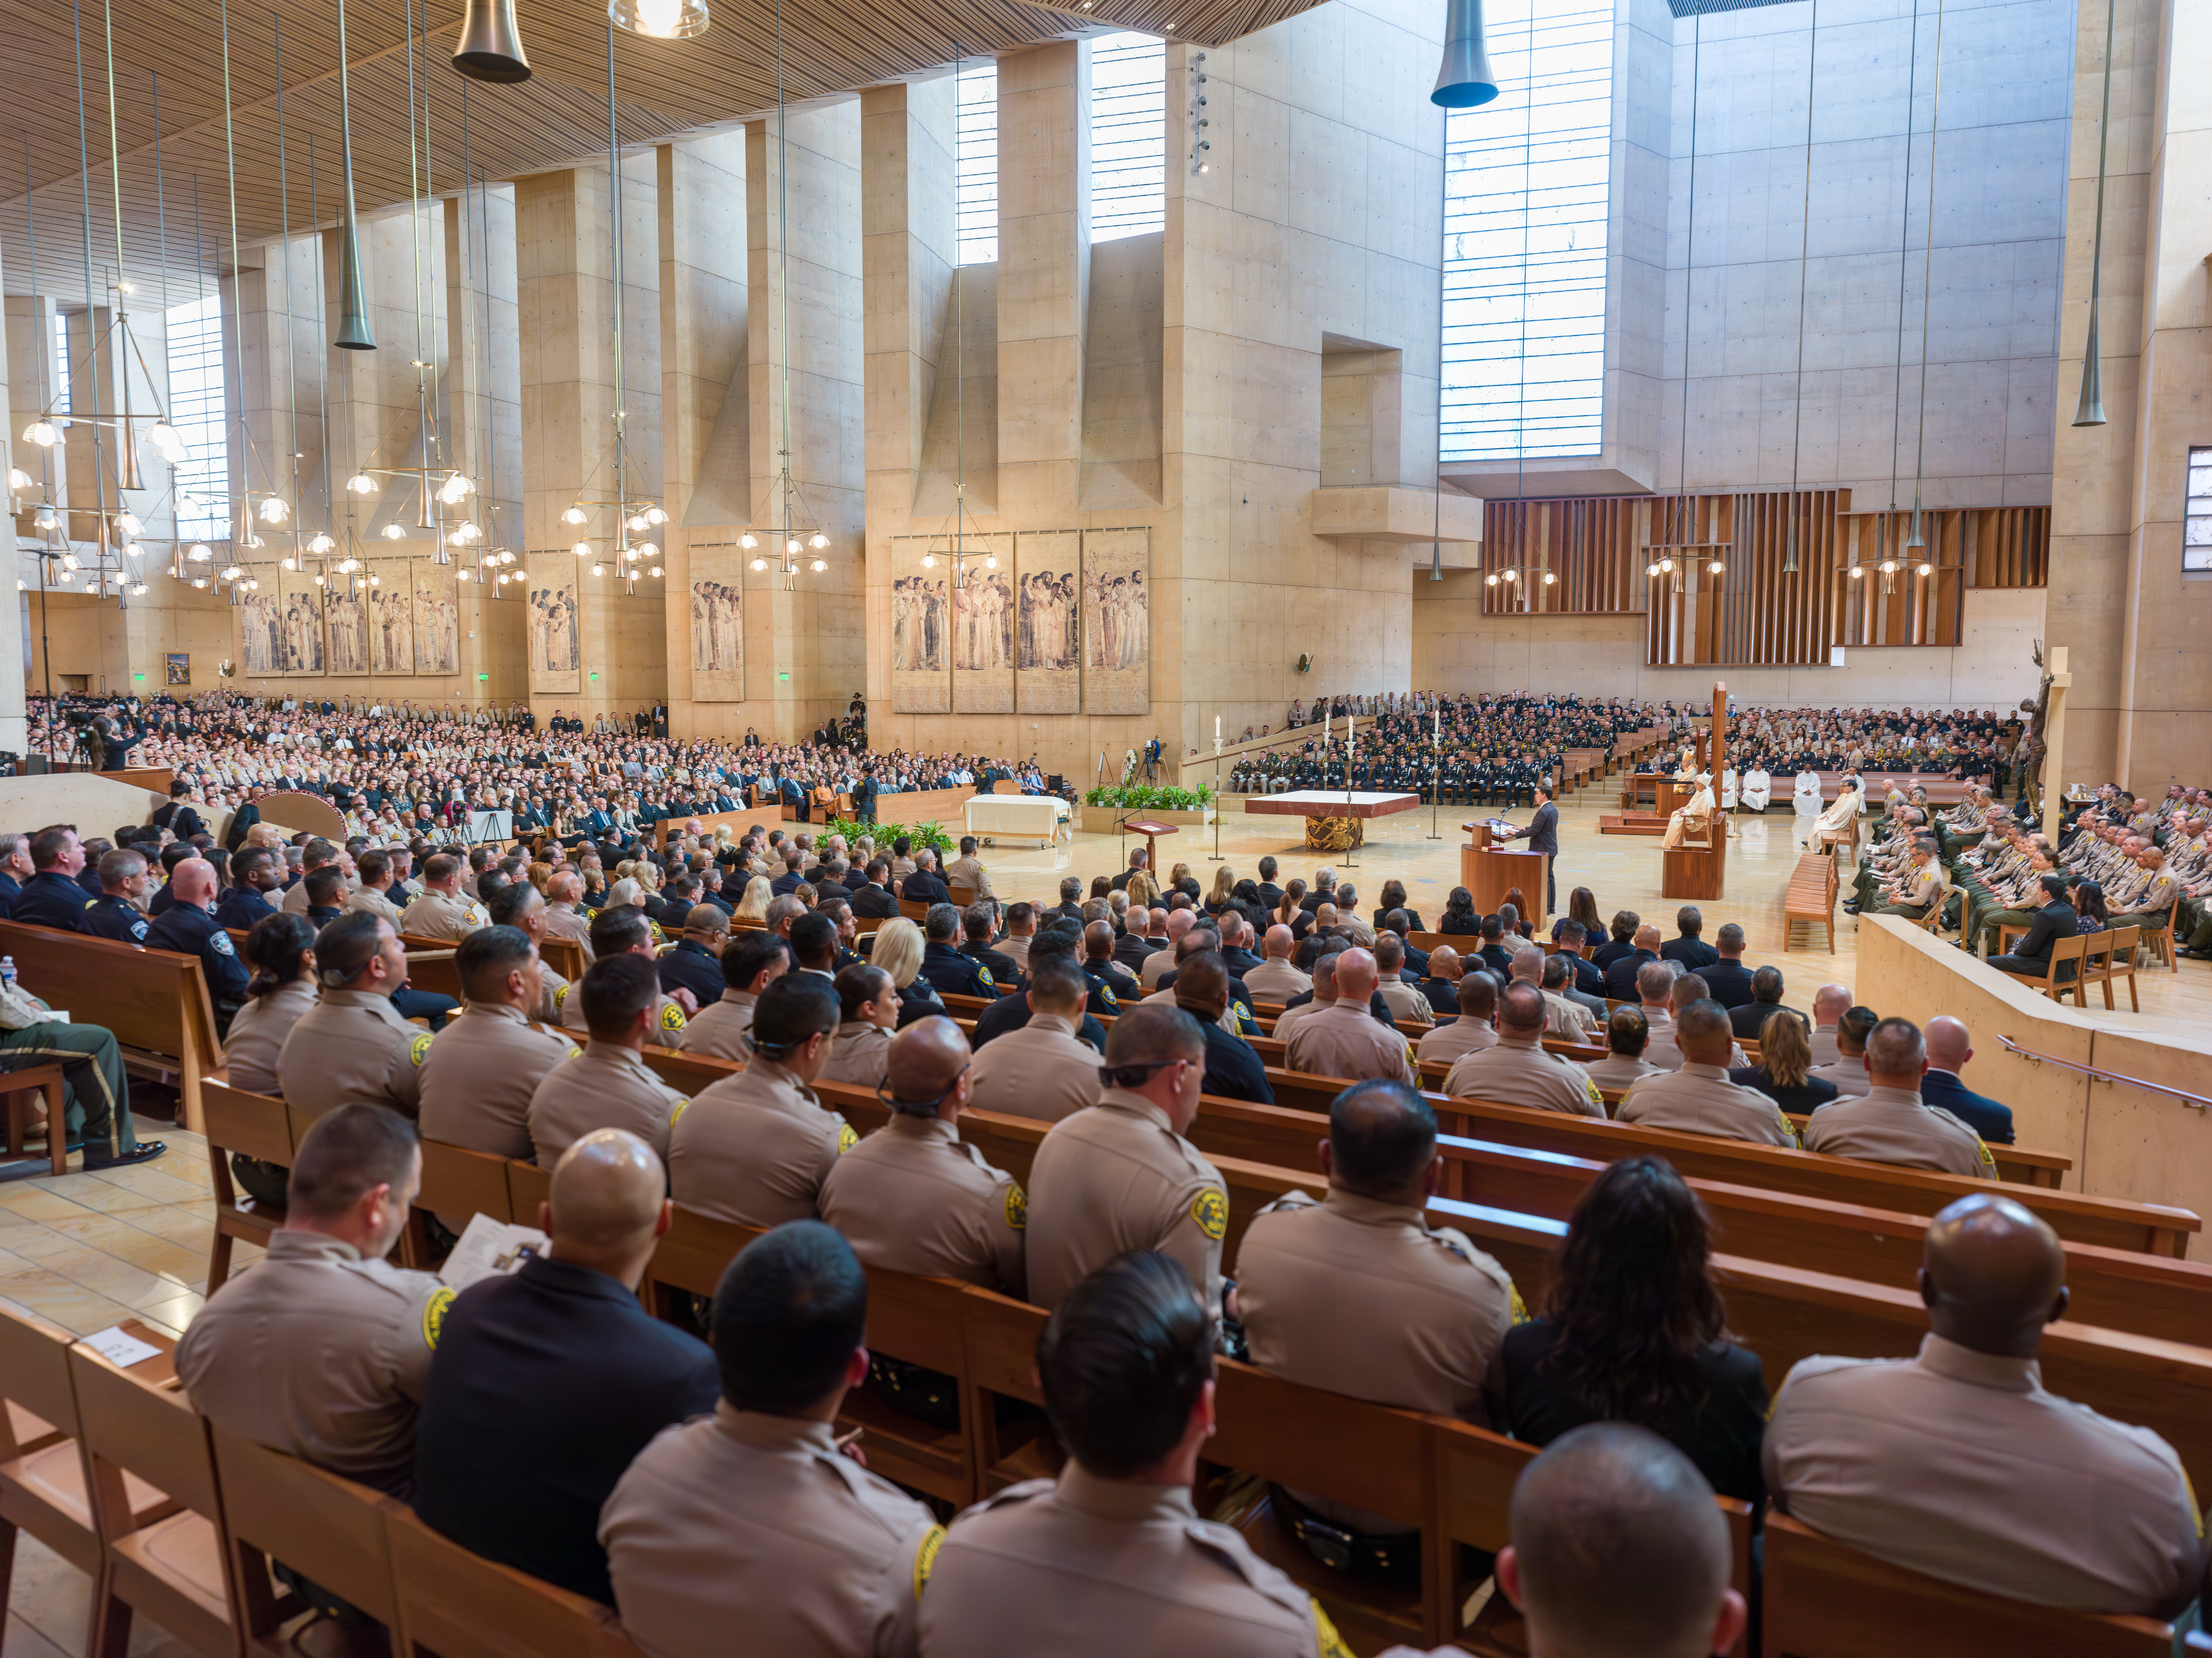 On Thursday morning, October 5, 2023, a funeral mass was held to honor the life and legacy of County of Los Angeles Sheriff’s Deputy Ryan Clinkunbroomer at the Cathedral of Our Lady of the Angels in Los Angeles.